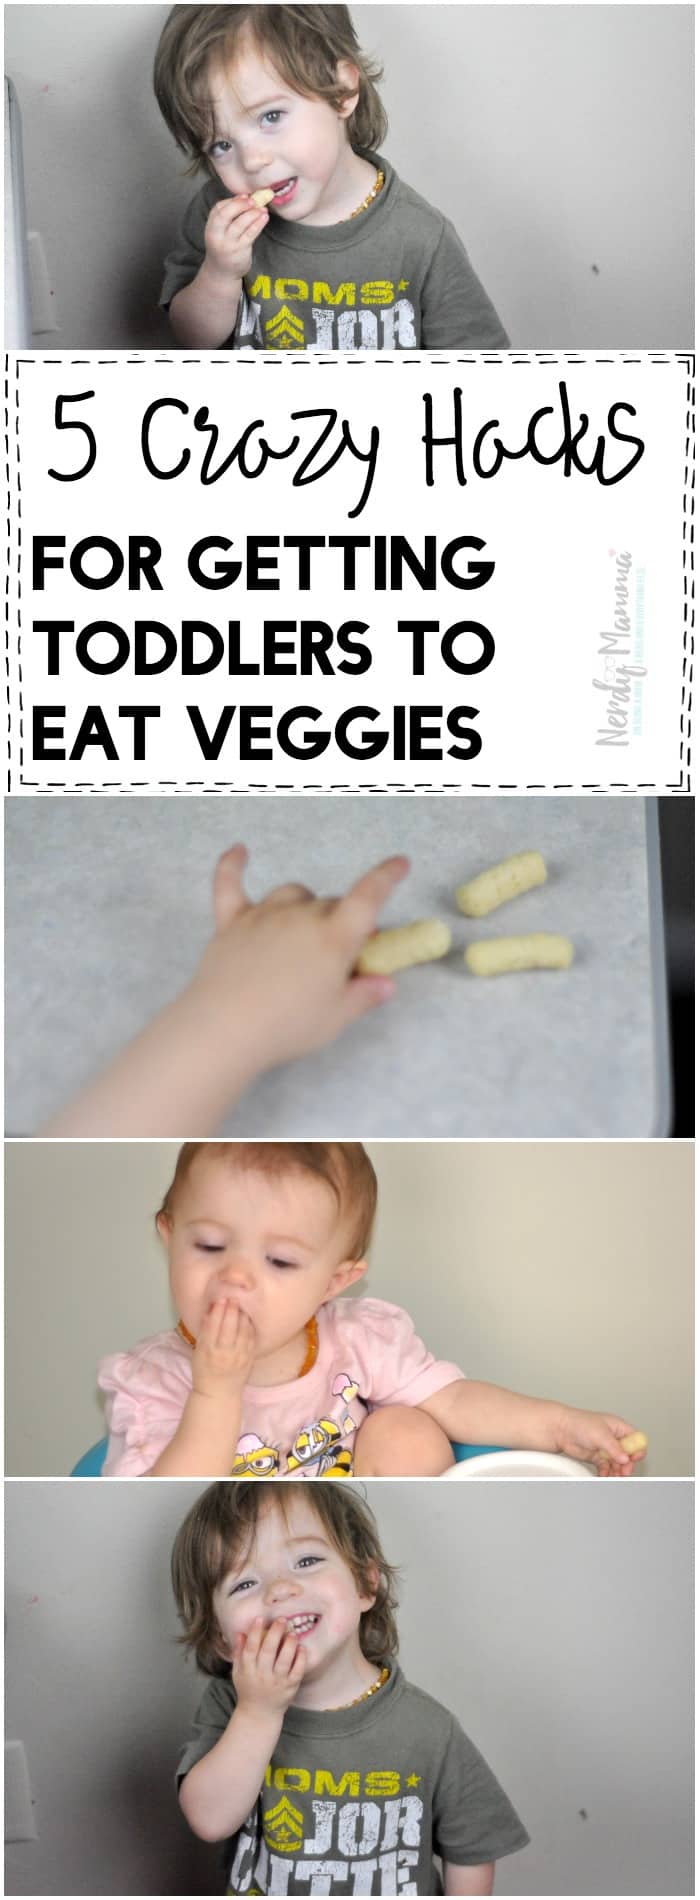 These 5 crazy hacks for getting toddlers to eat veggies actually work! My kids have been eating veggies like they're going out of style!